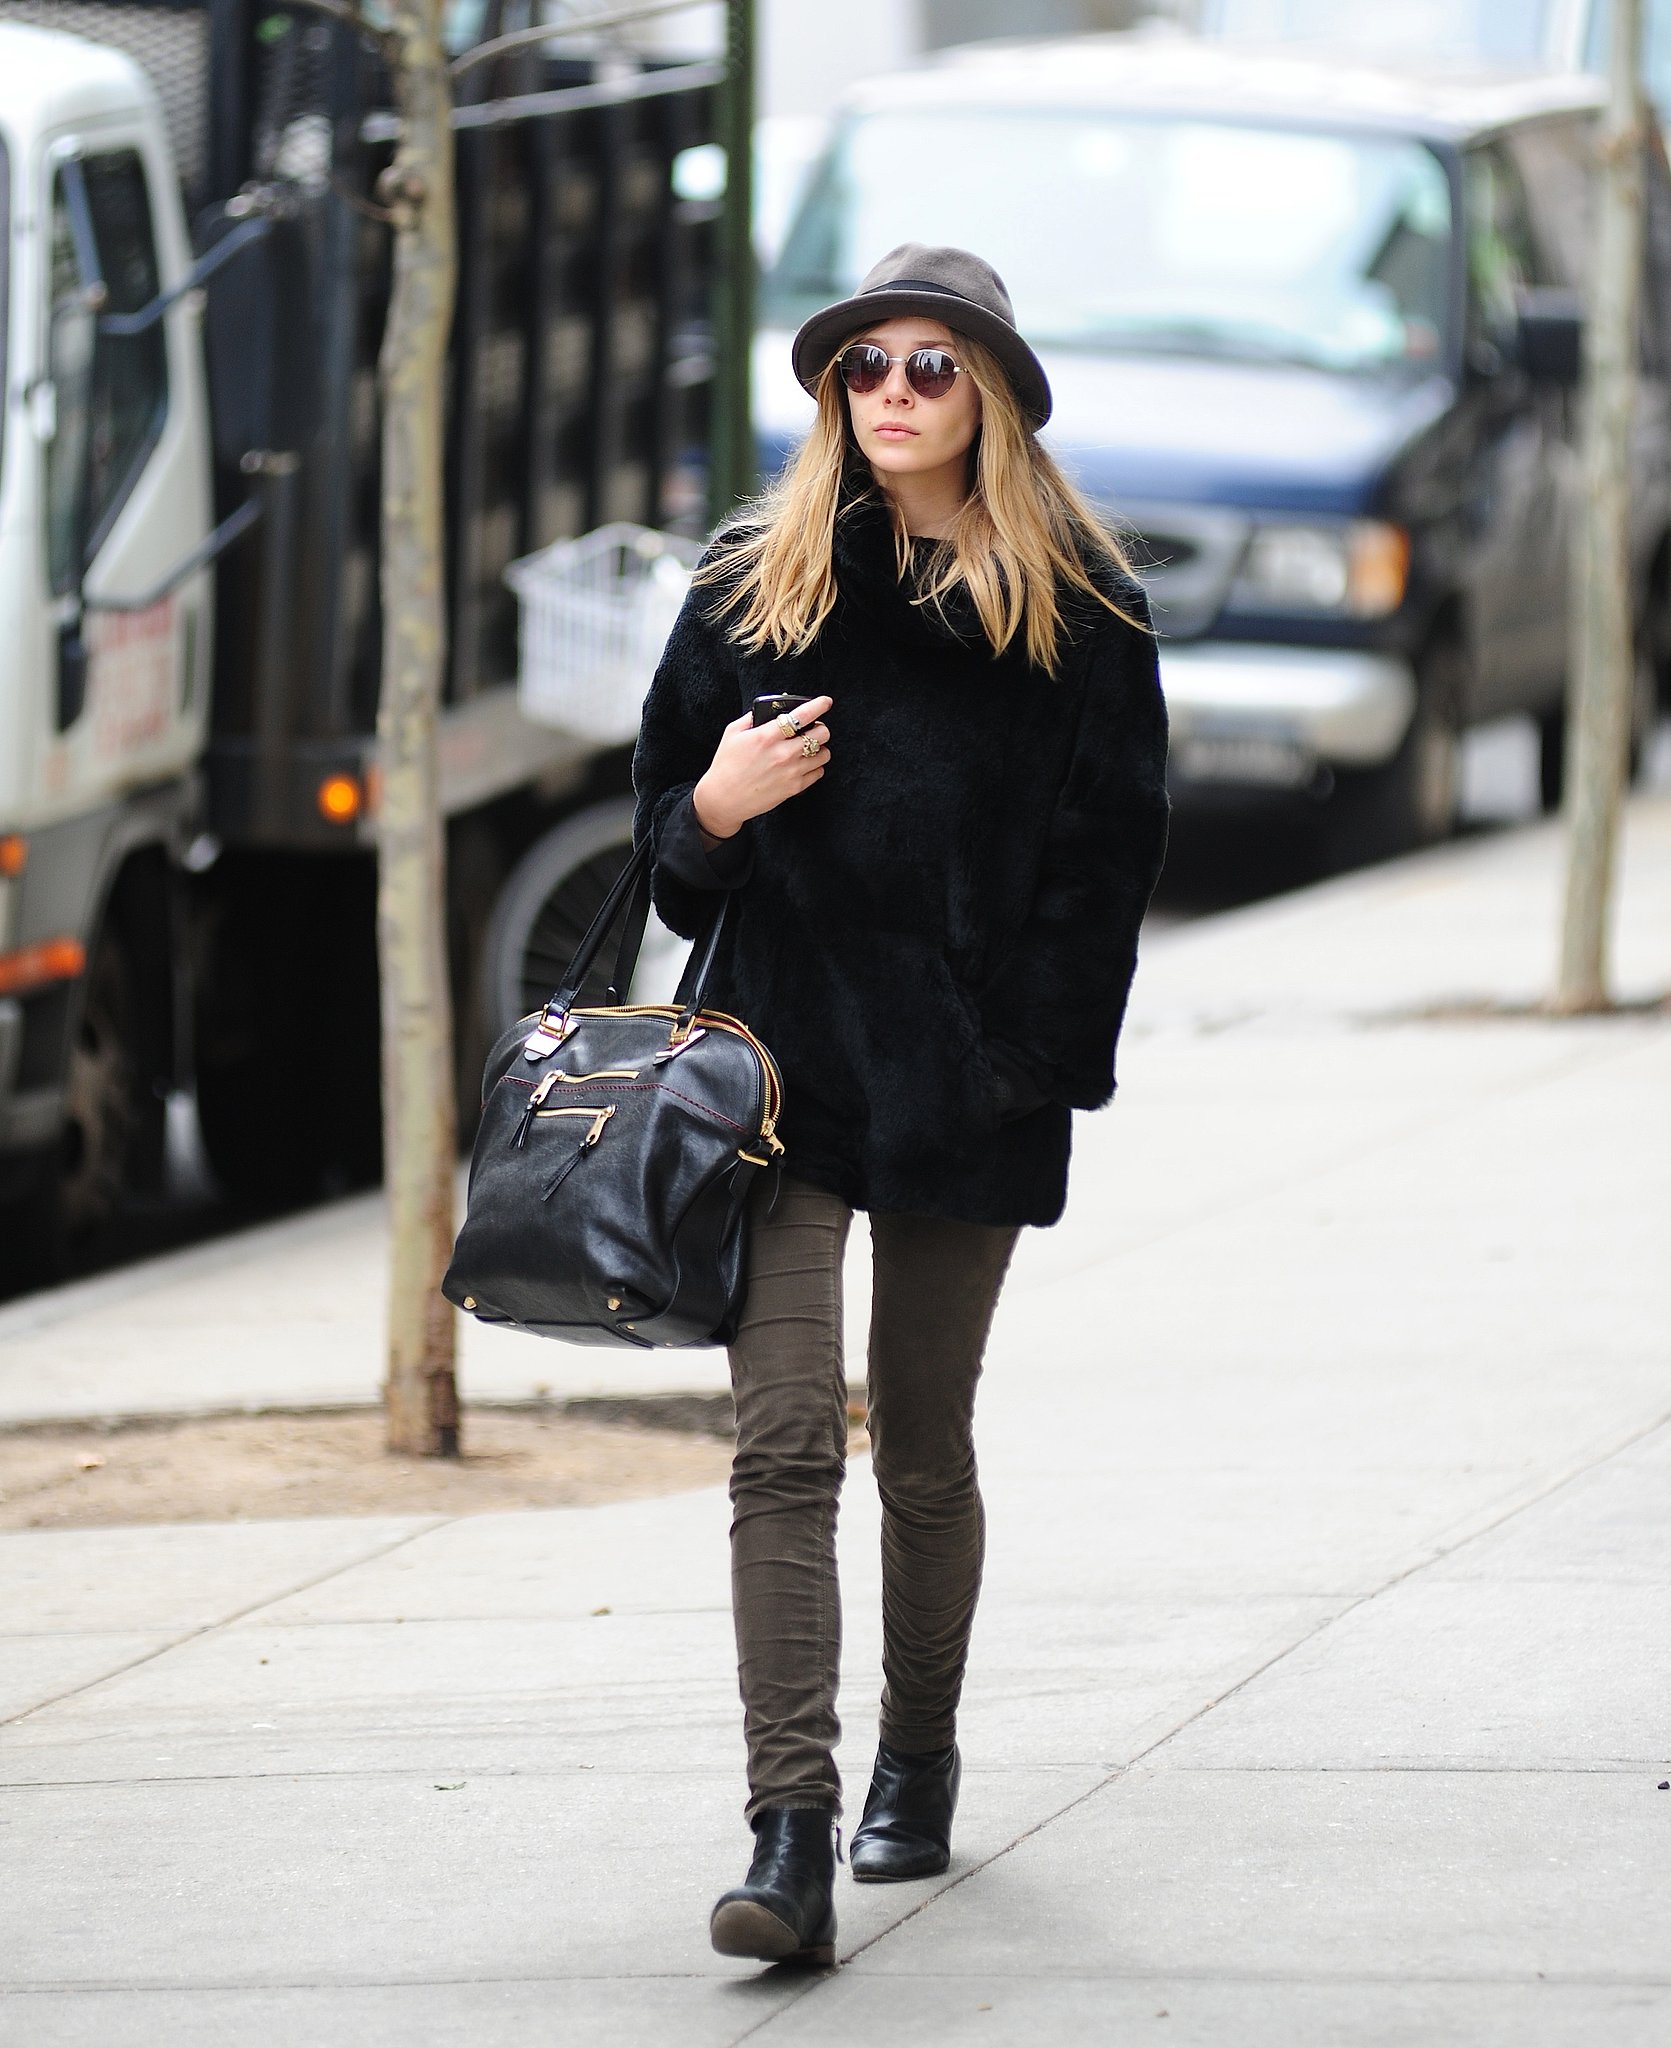 Elizabeth Olsen make this undertated outfit something special by the